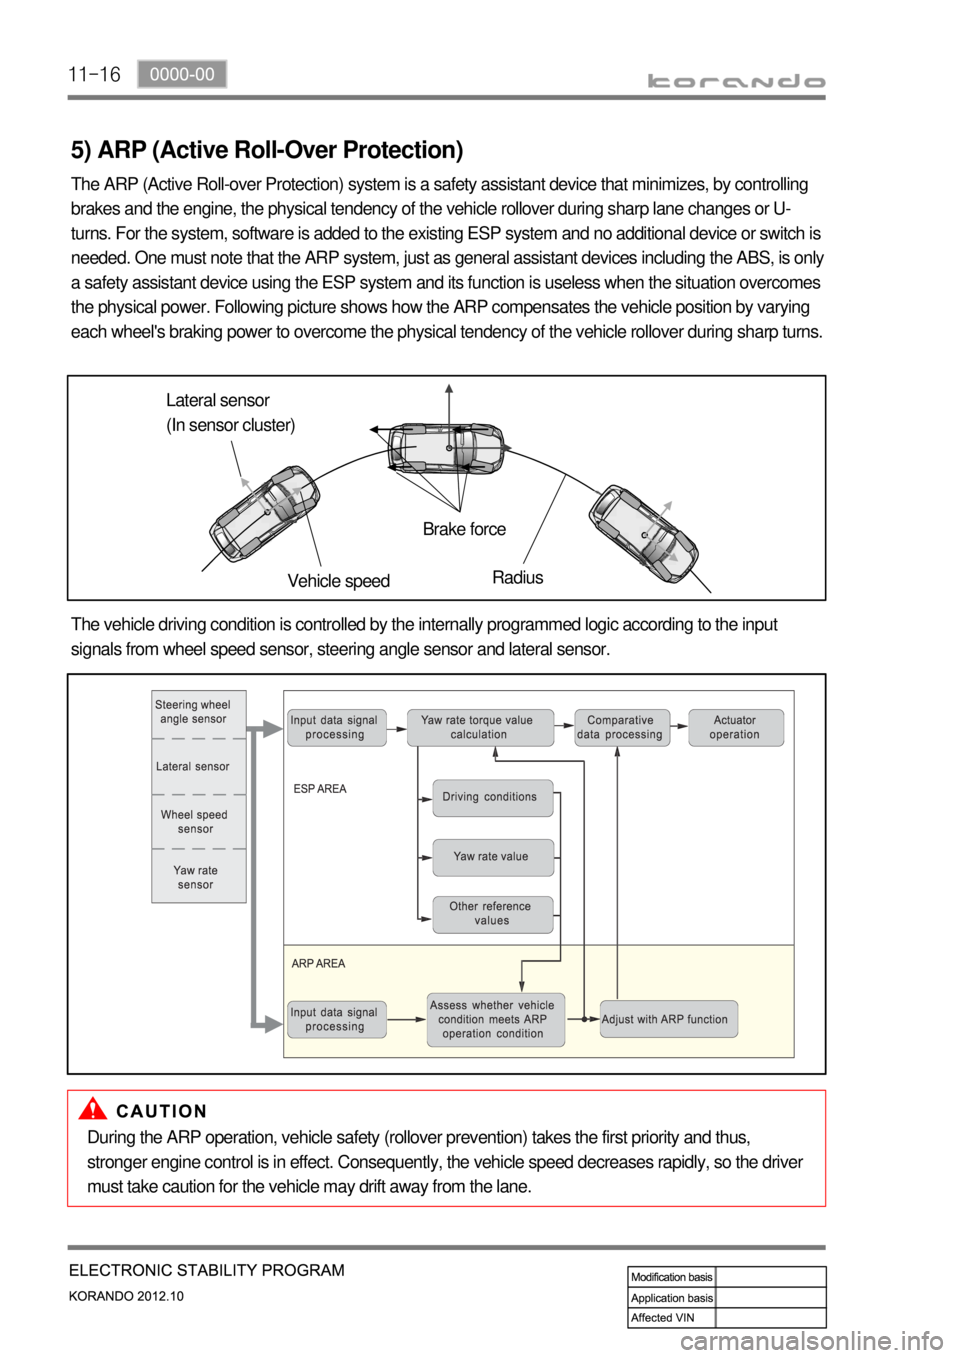 SSANGYONG KORANDO 2012 Owners Manual 11-16
5) ARP (Active Roll-Over Protection)
The ARP (Active Roll-over Protection) system is a safety assistant device that minimizes, by controlling 
brakes and the engine, the physical tendency of the